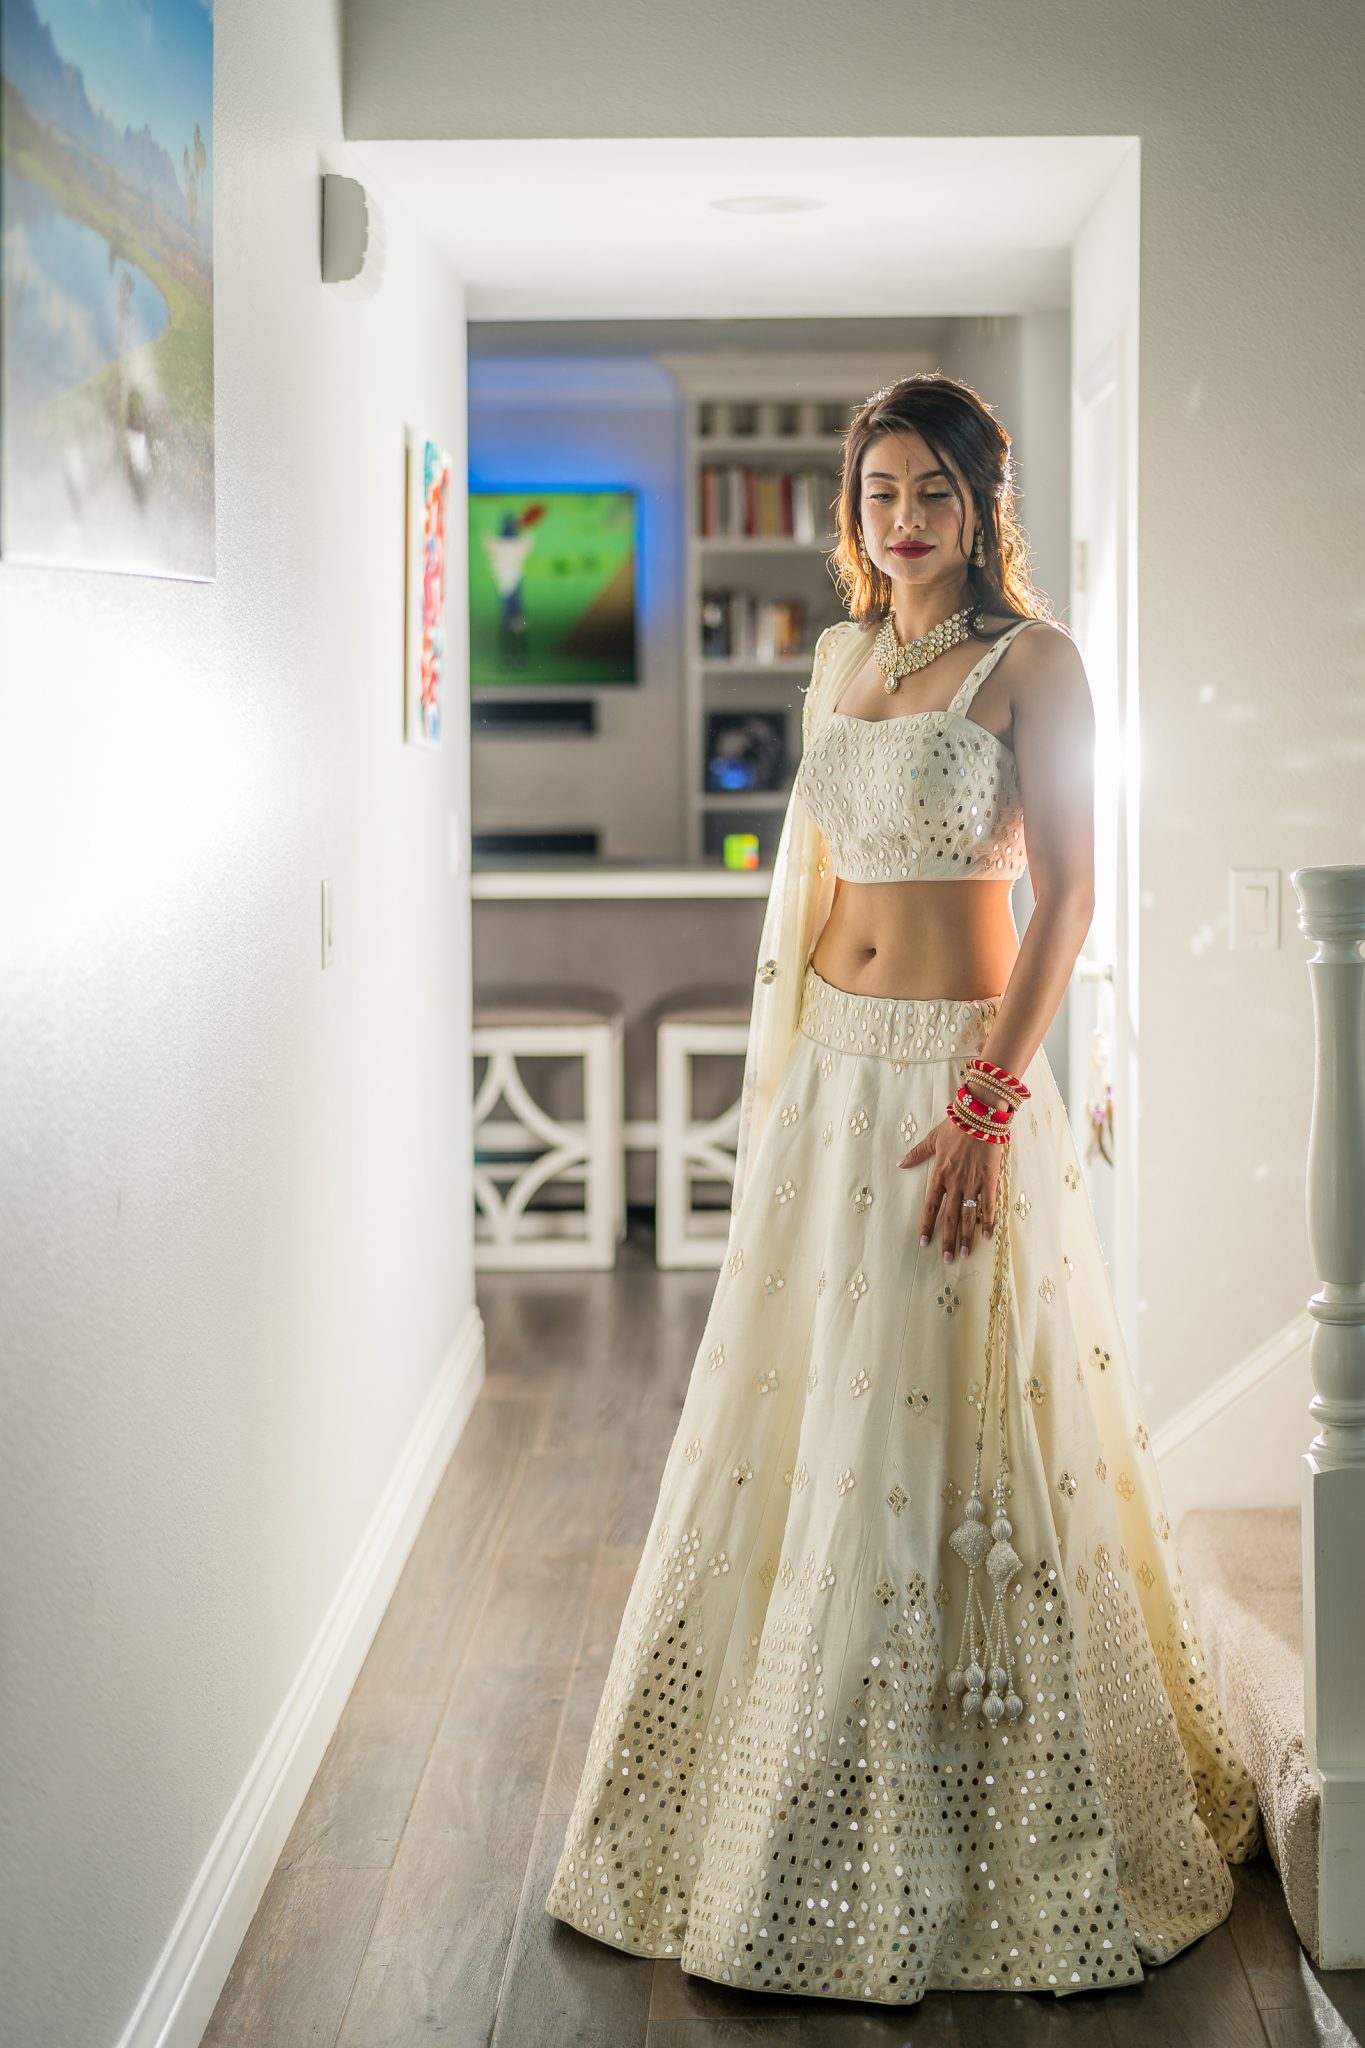 ThomasKim_photography A bride standing in a hallway.